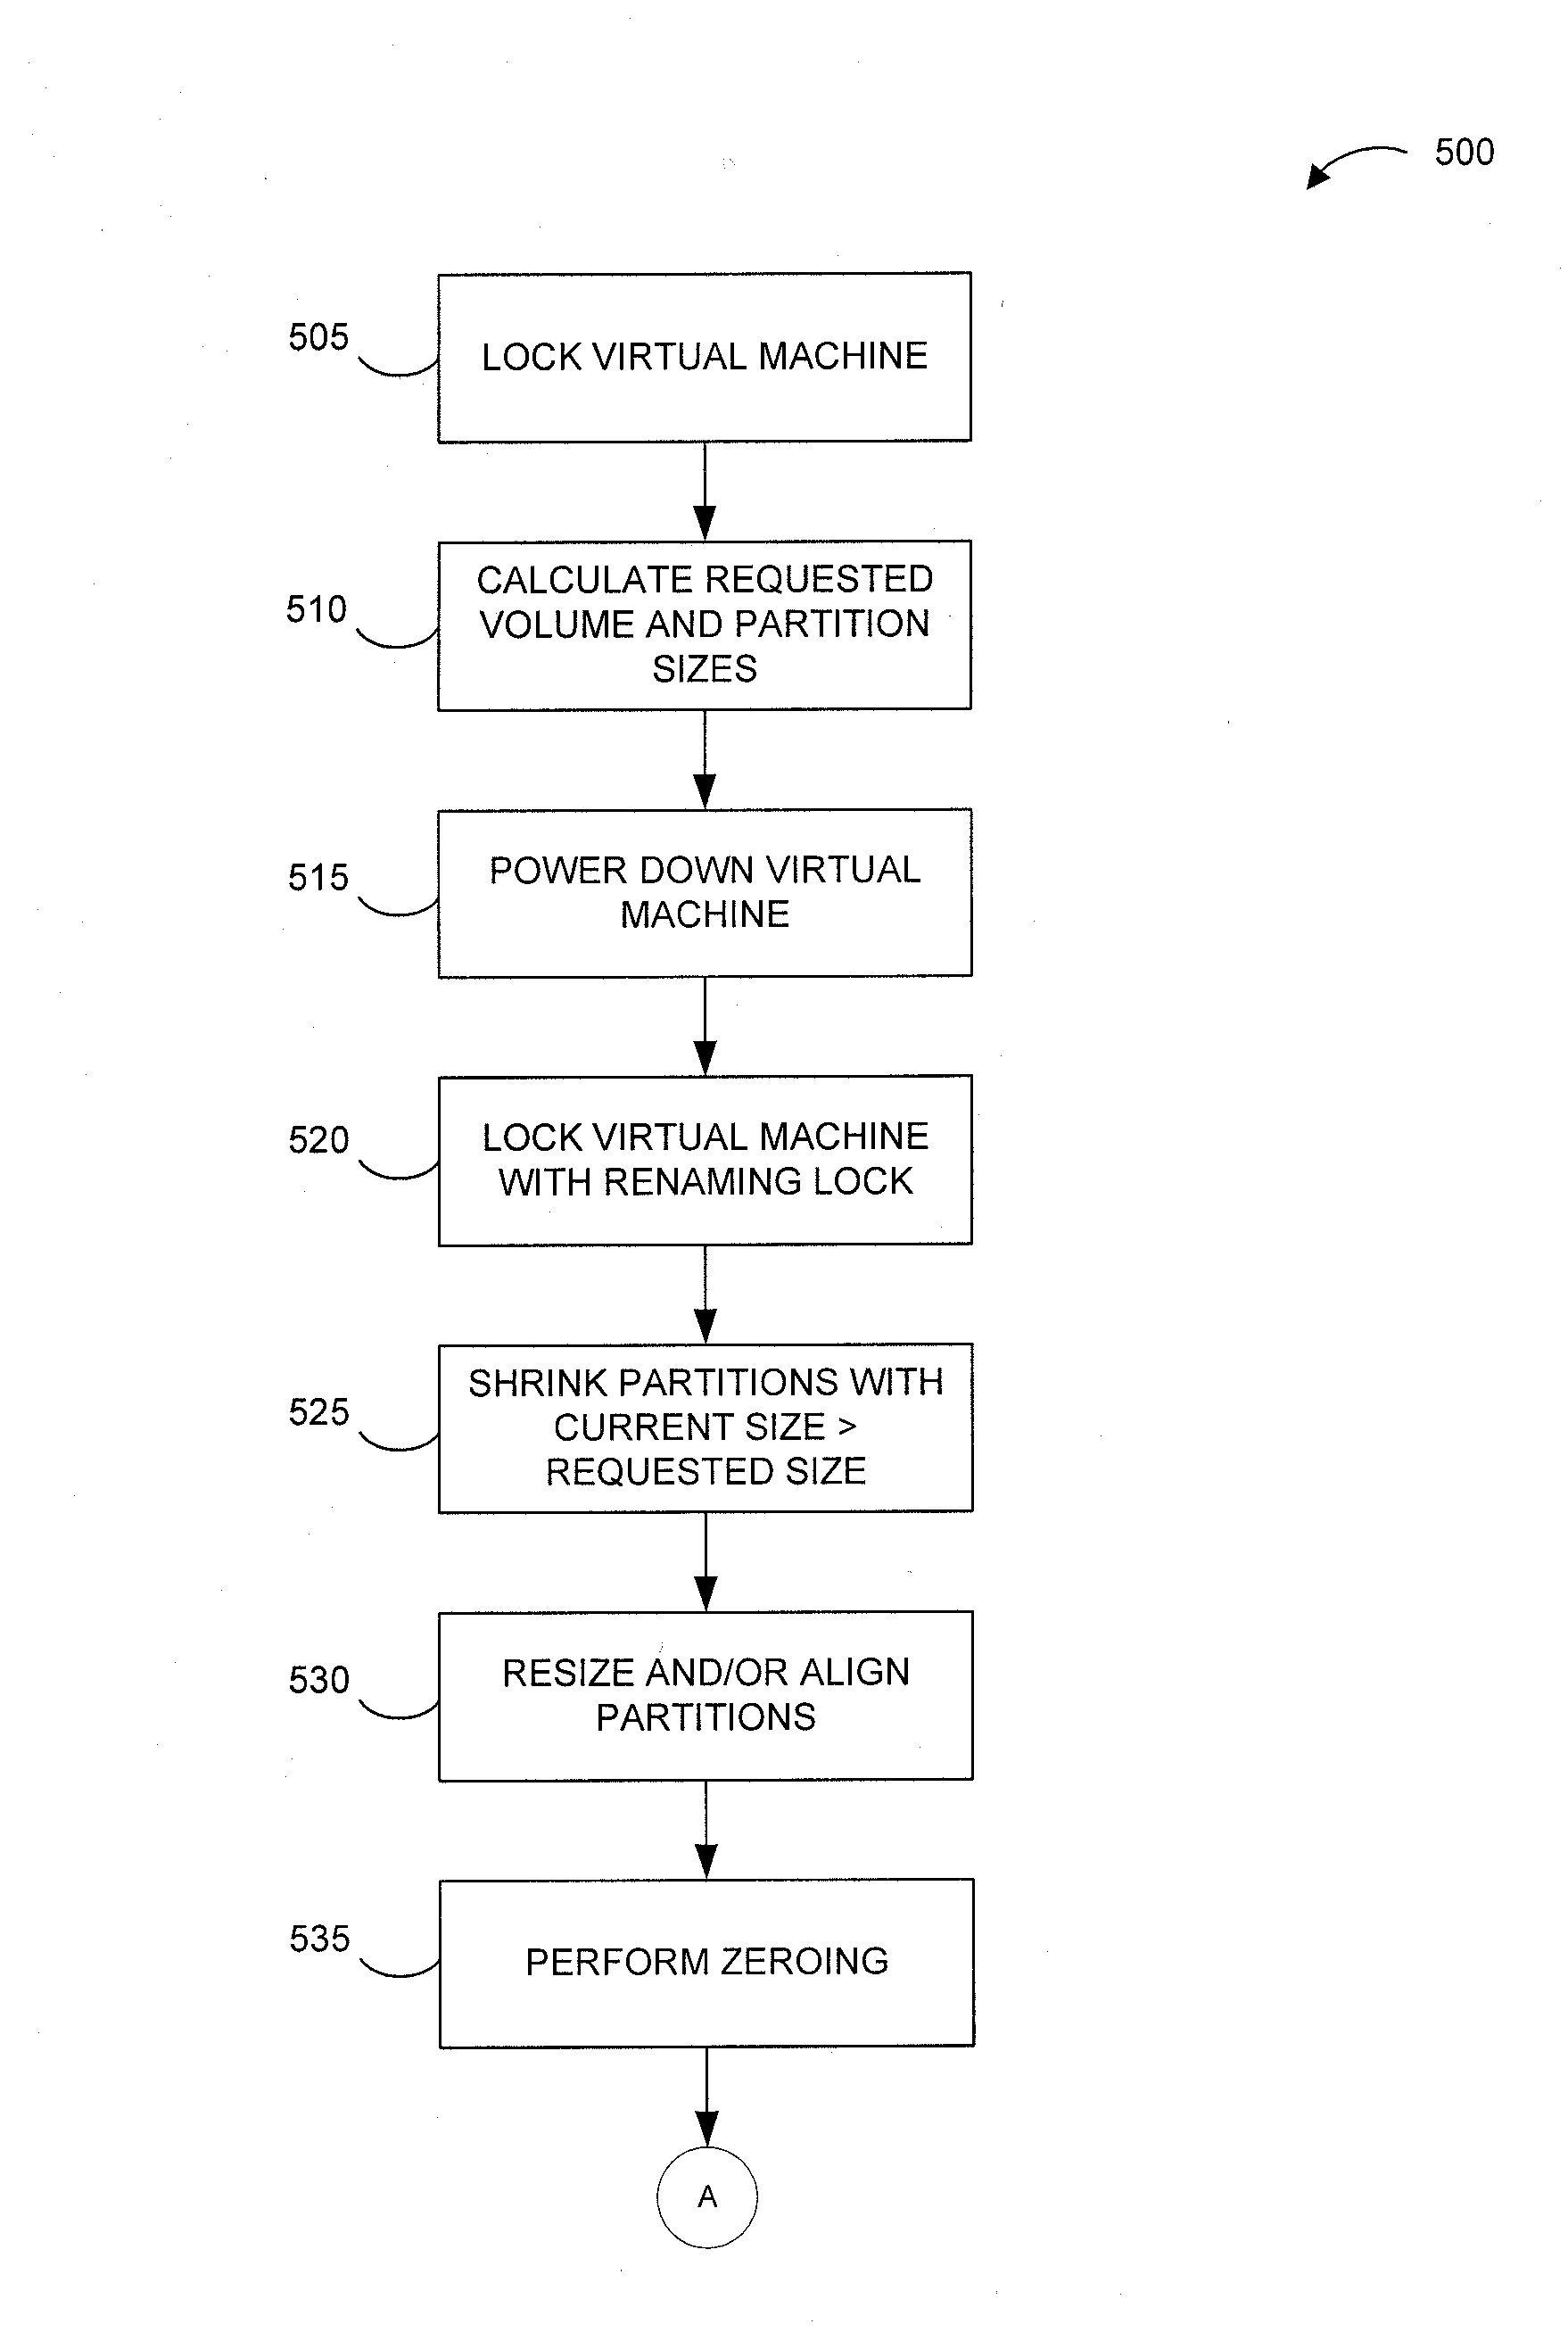 Systems and methods for improving virtual machine performance